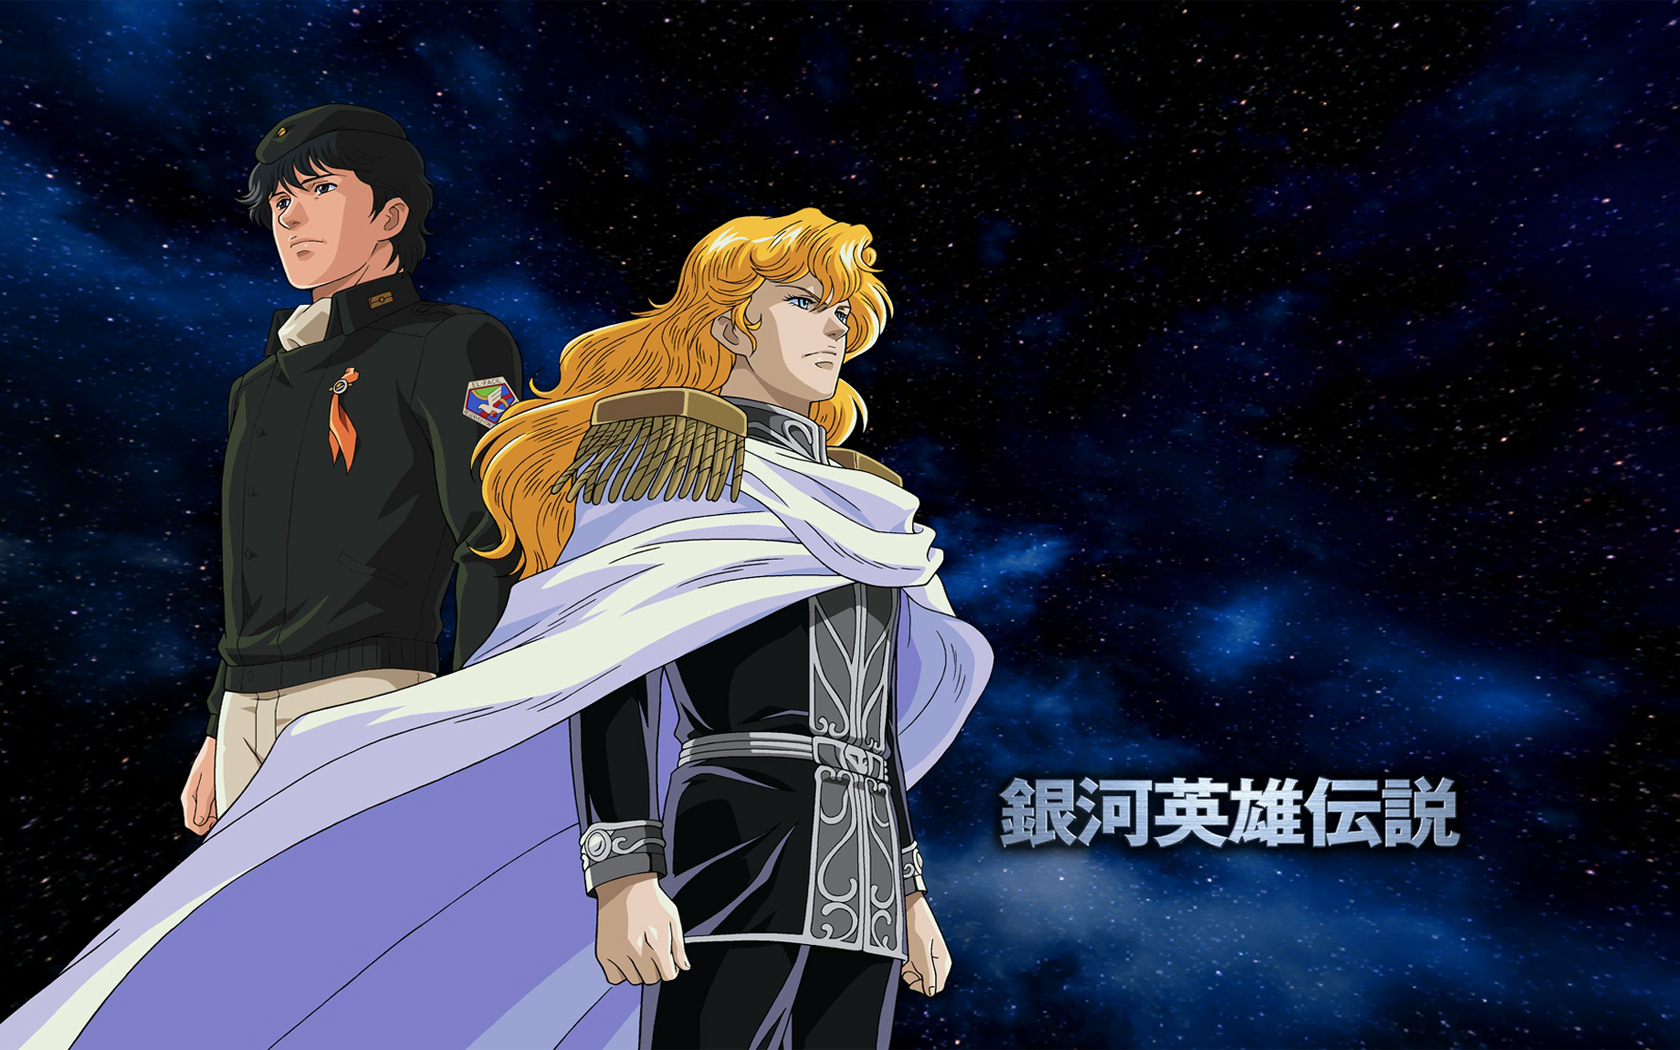 Anime wallpaper with characters from Legend of the Galactic Heroes, Ginga Eiyuu Densetsu.